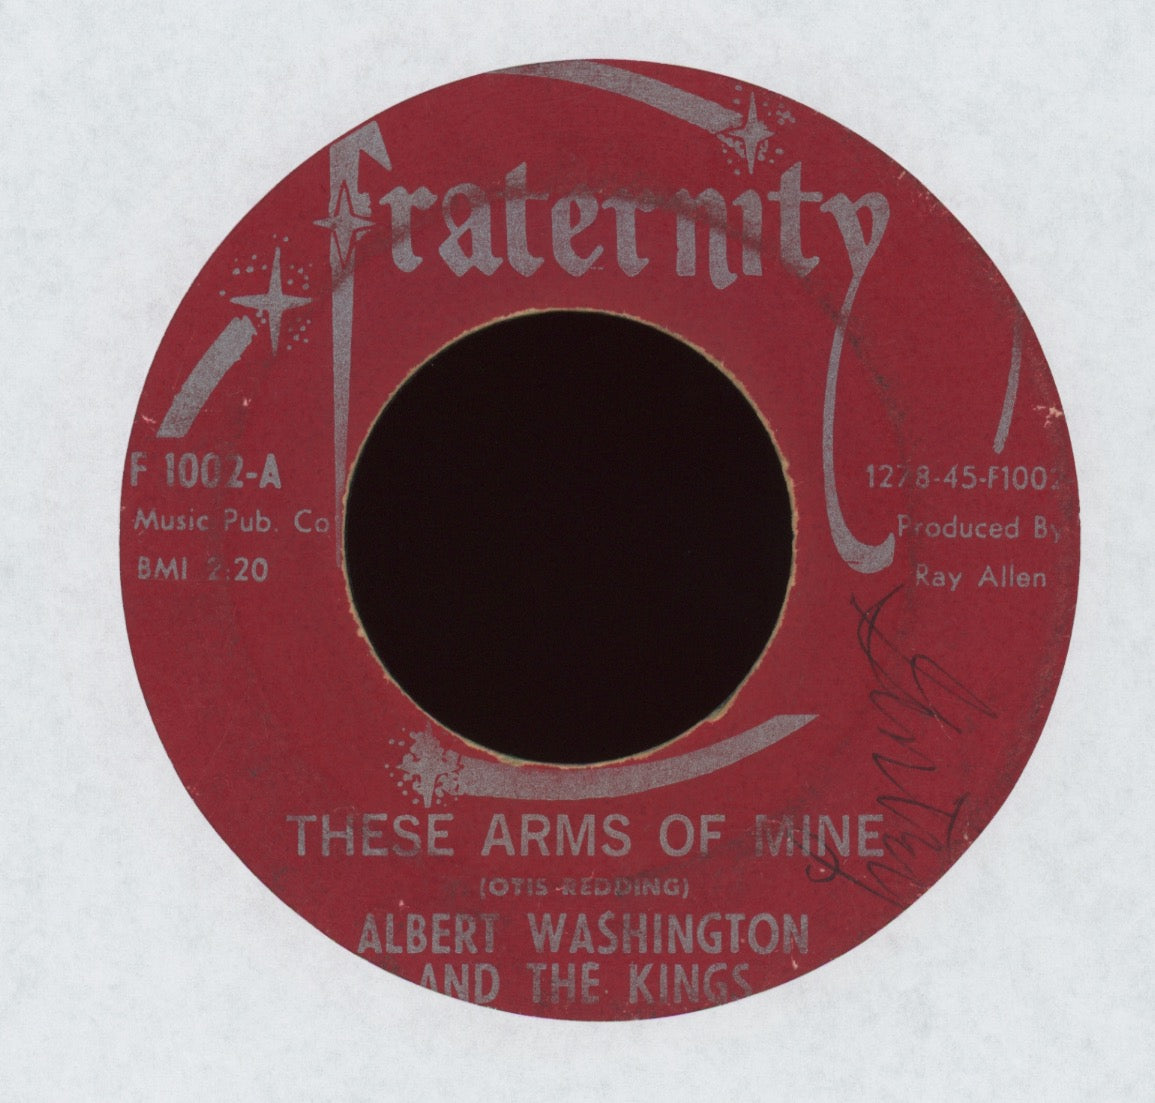 Albert Washington And The Kings - I'm The Man on Fraternity